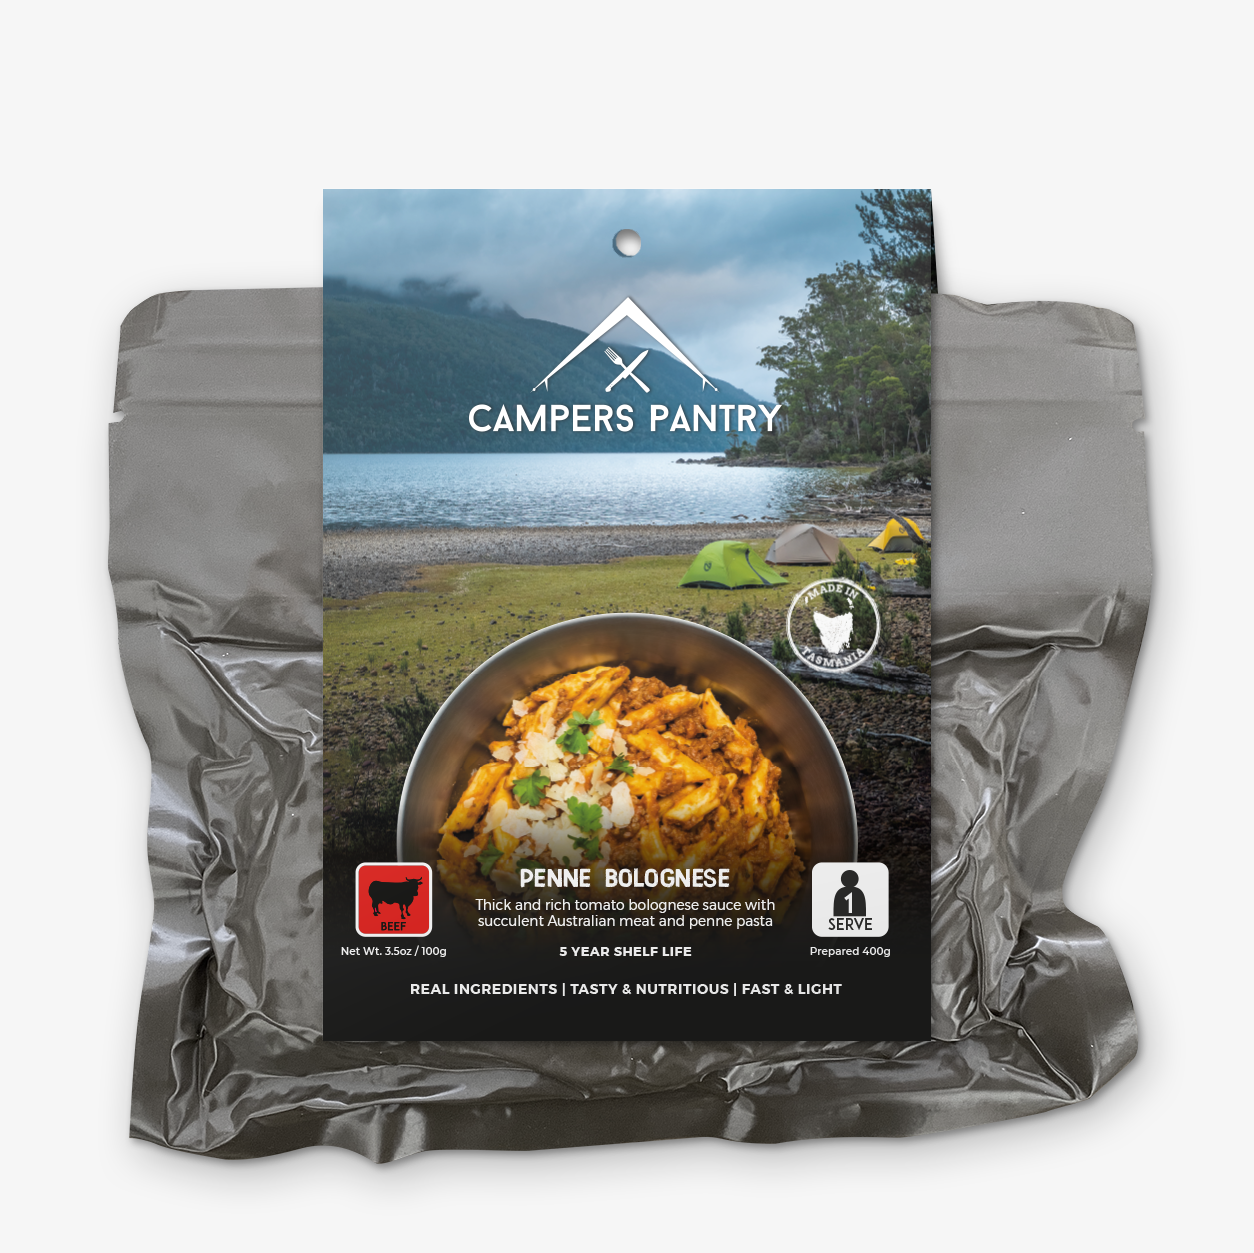 Campers Pantry Penne Bolognese